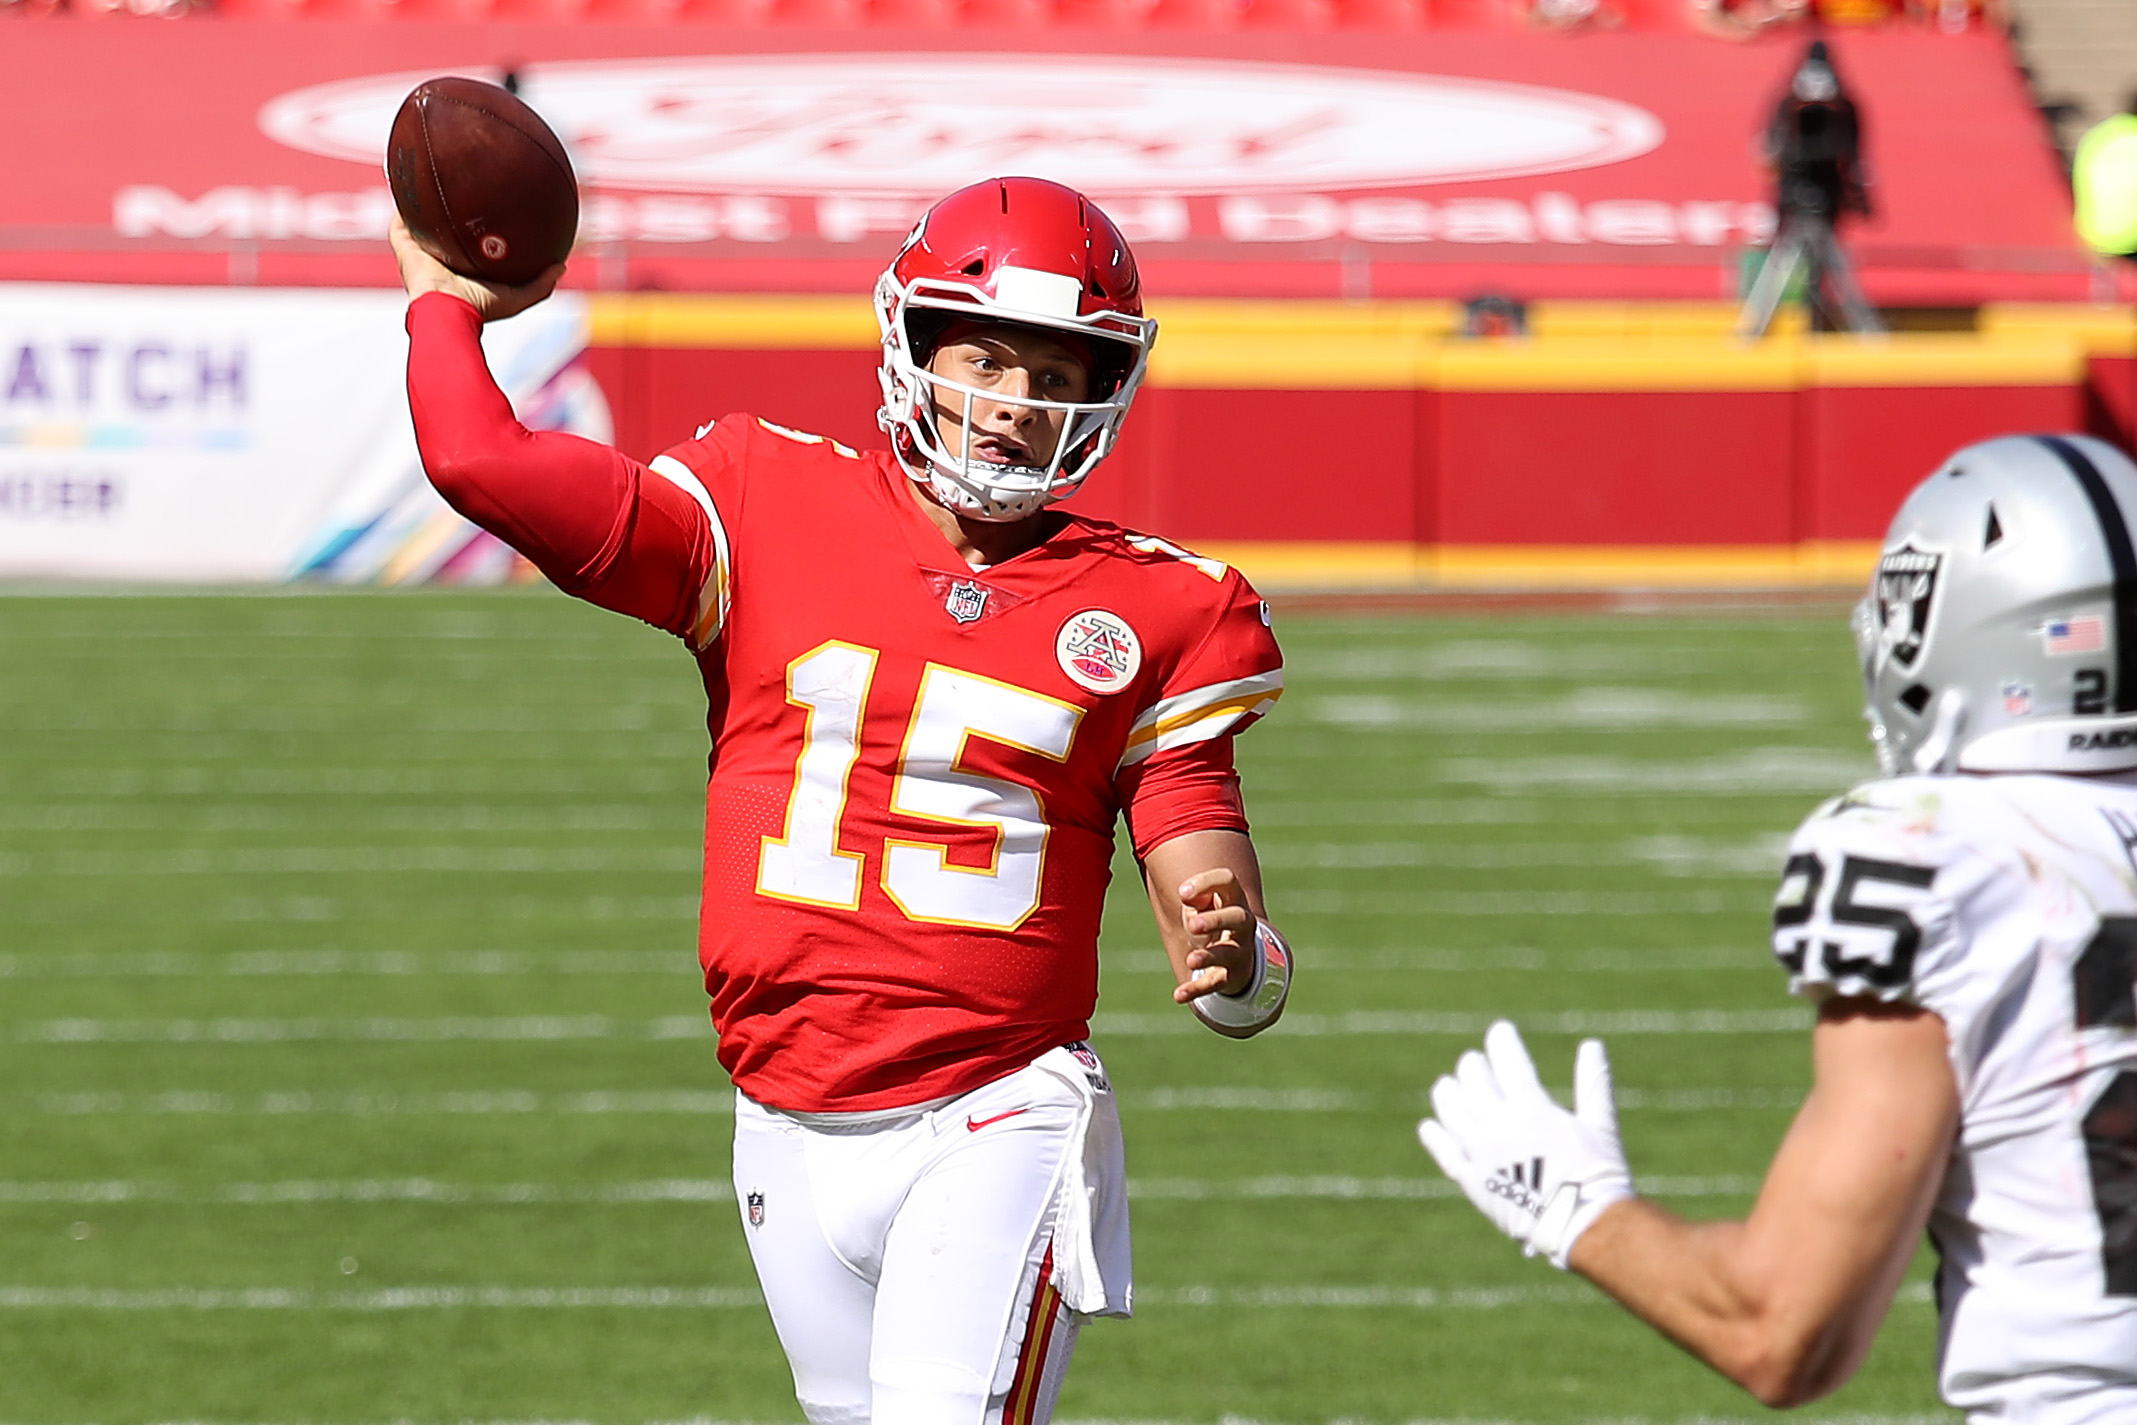 Patrick Mahomes throwing a touchdown pass